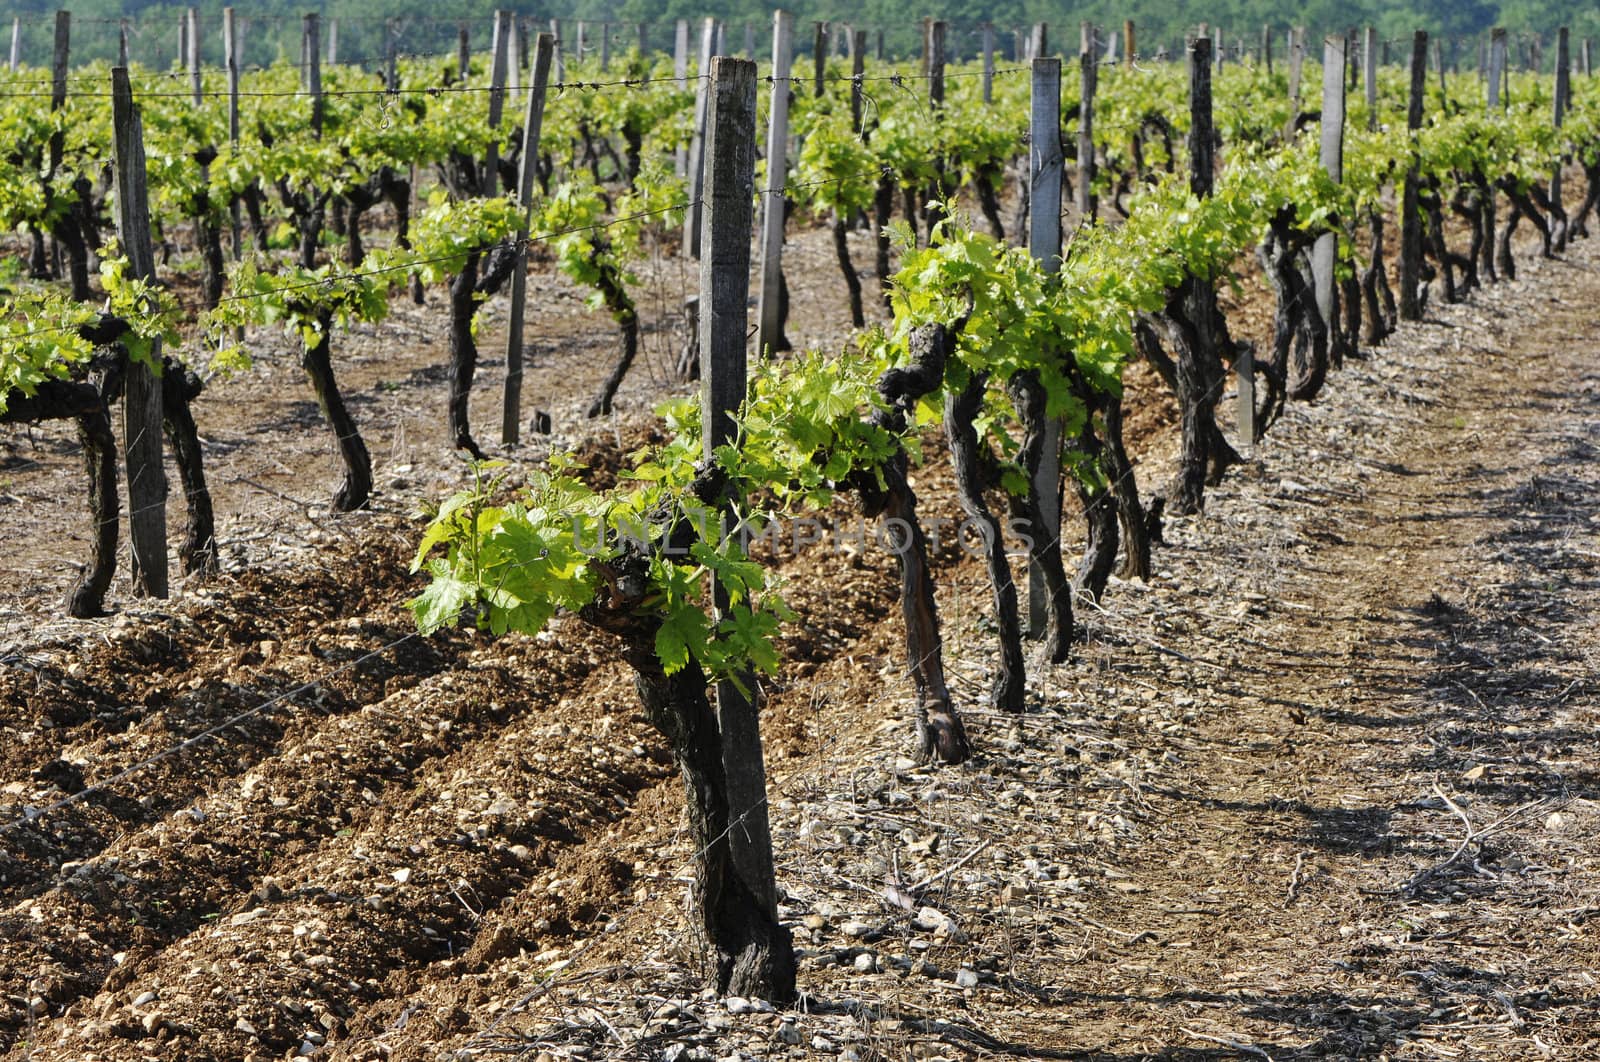 Vineyard of Young Vine with Green Leafs